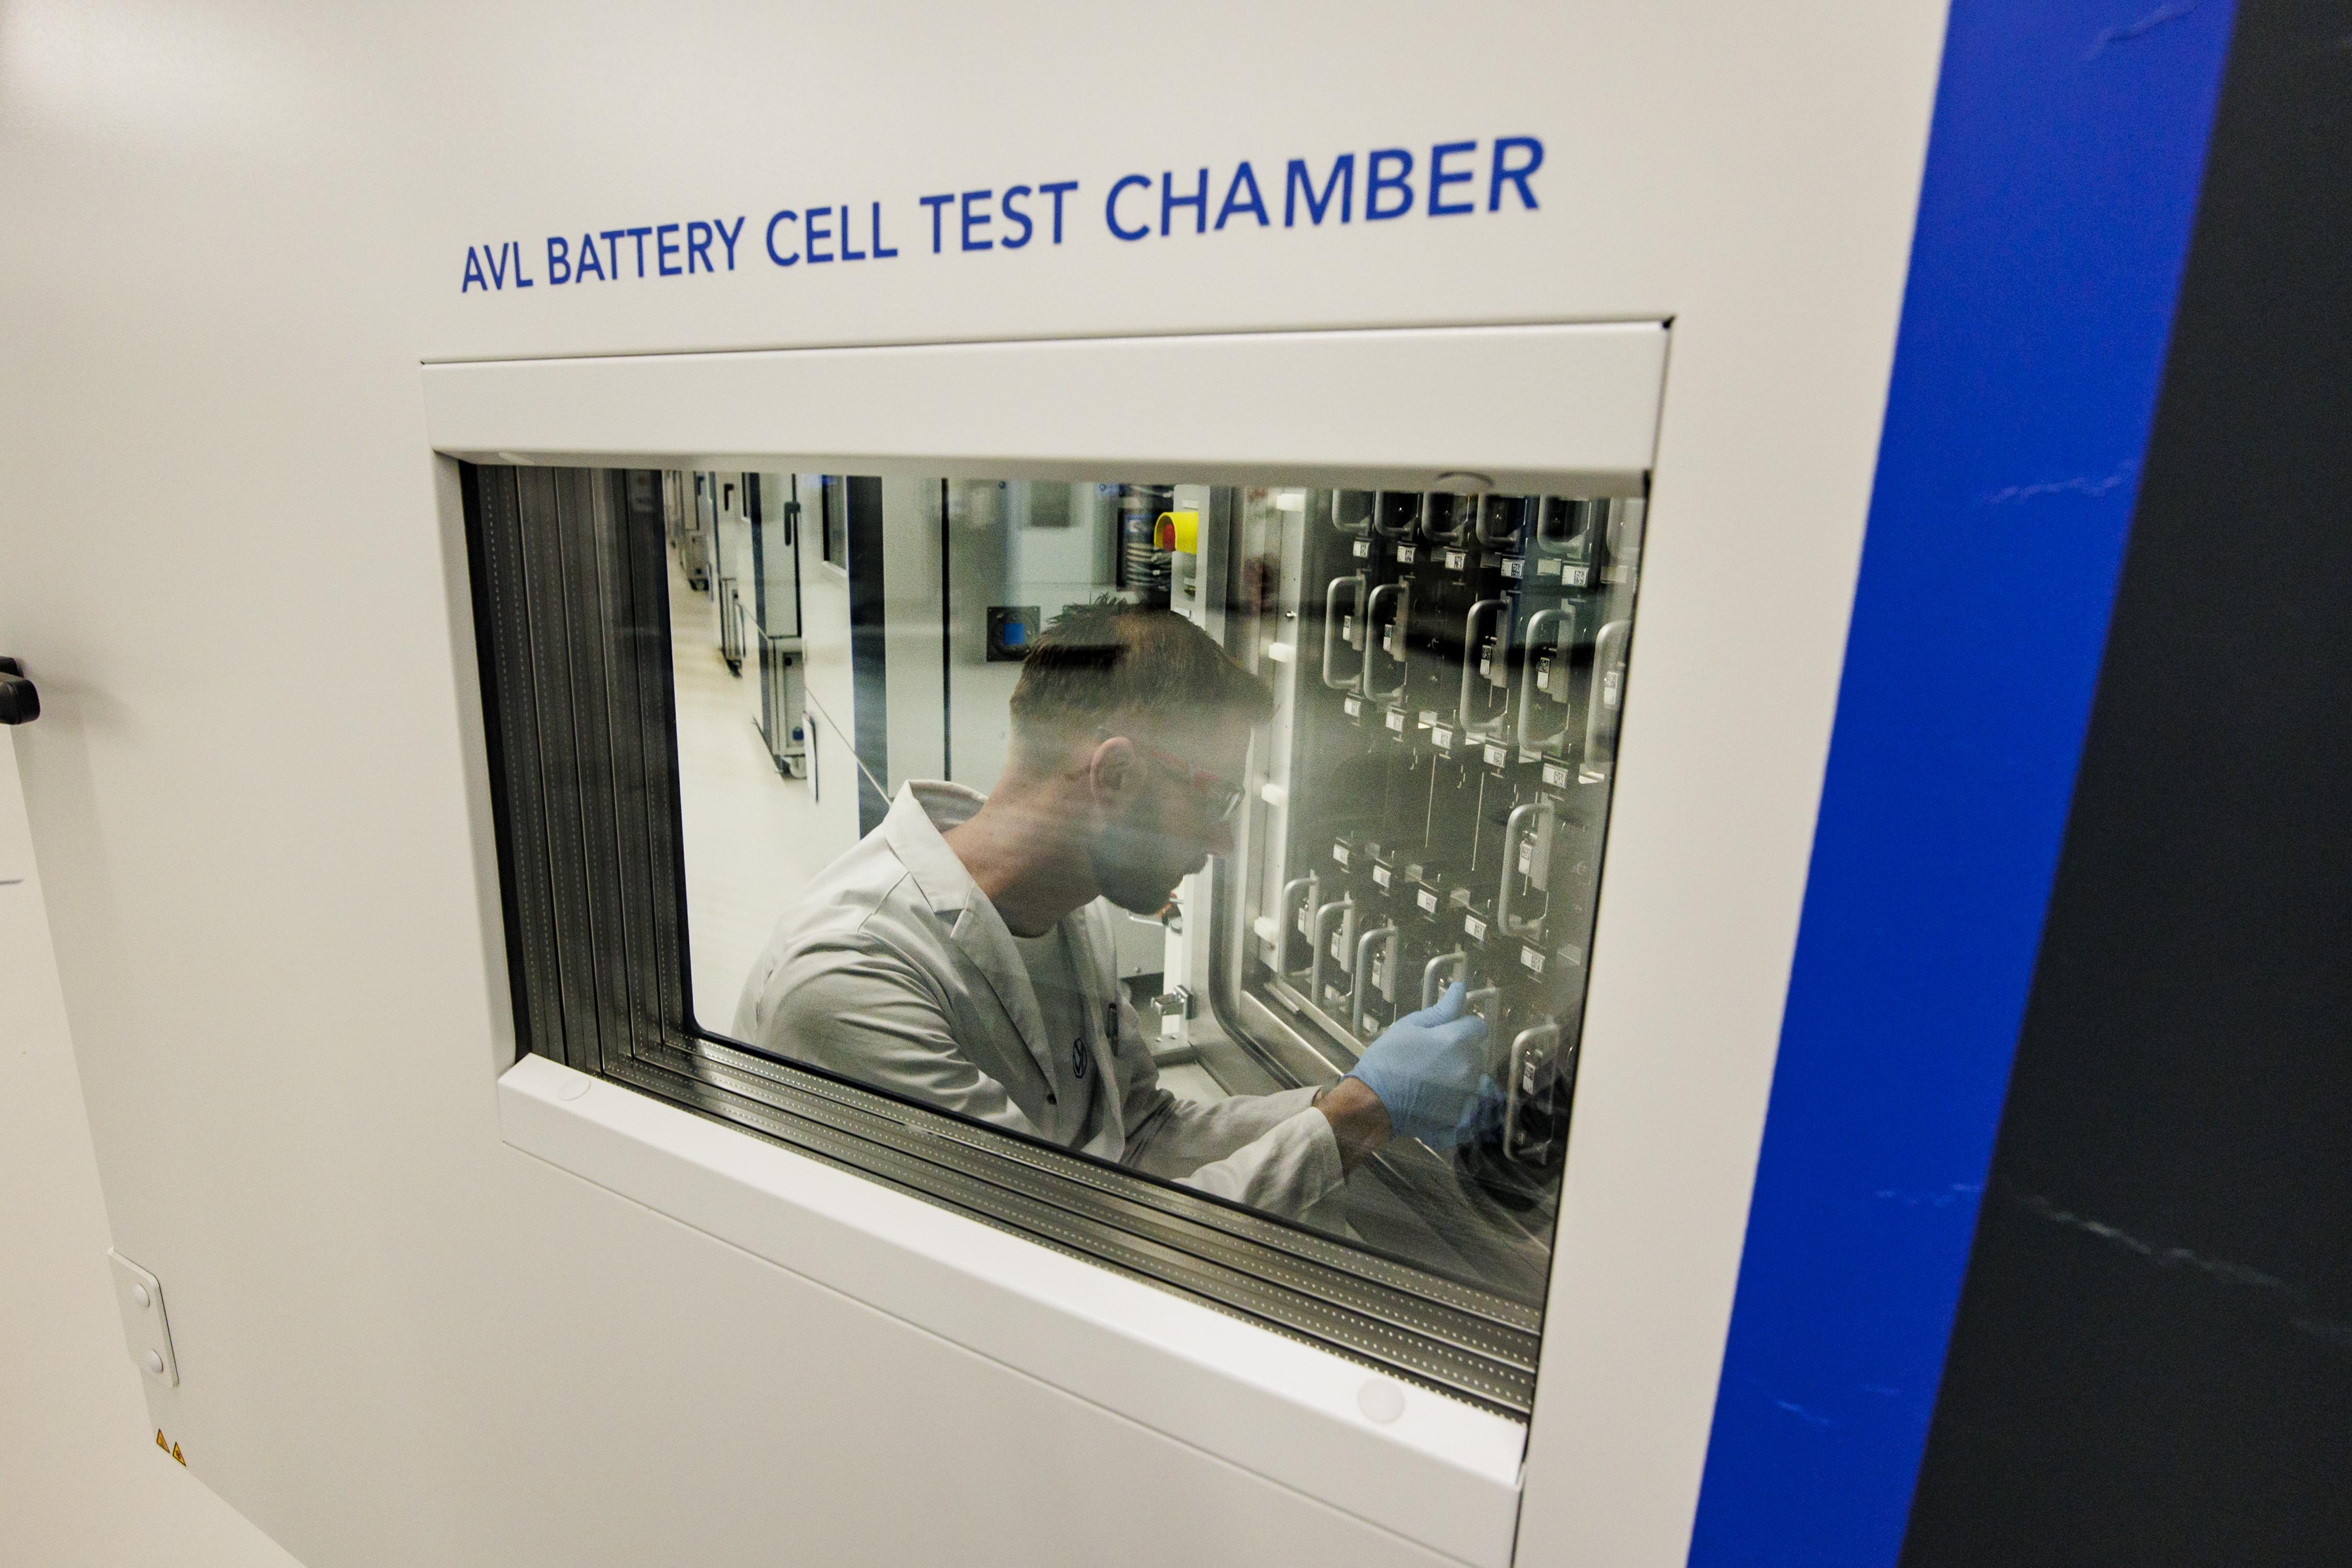 A worker in a lab coat stands behind a door with a window. Above the window, text says "AVL Battery Cell Test Chamber." The worker is working on what appear to be EV car batteries.